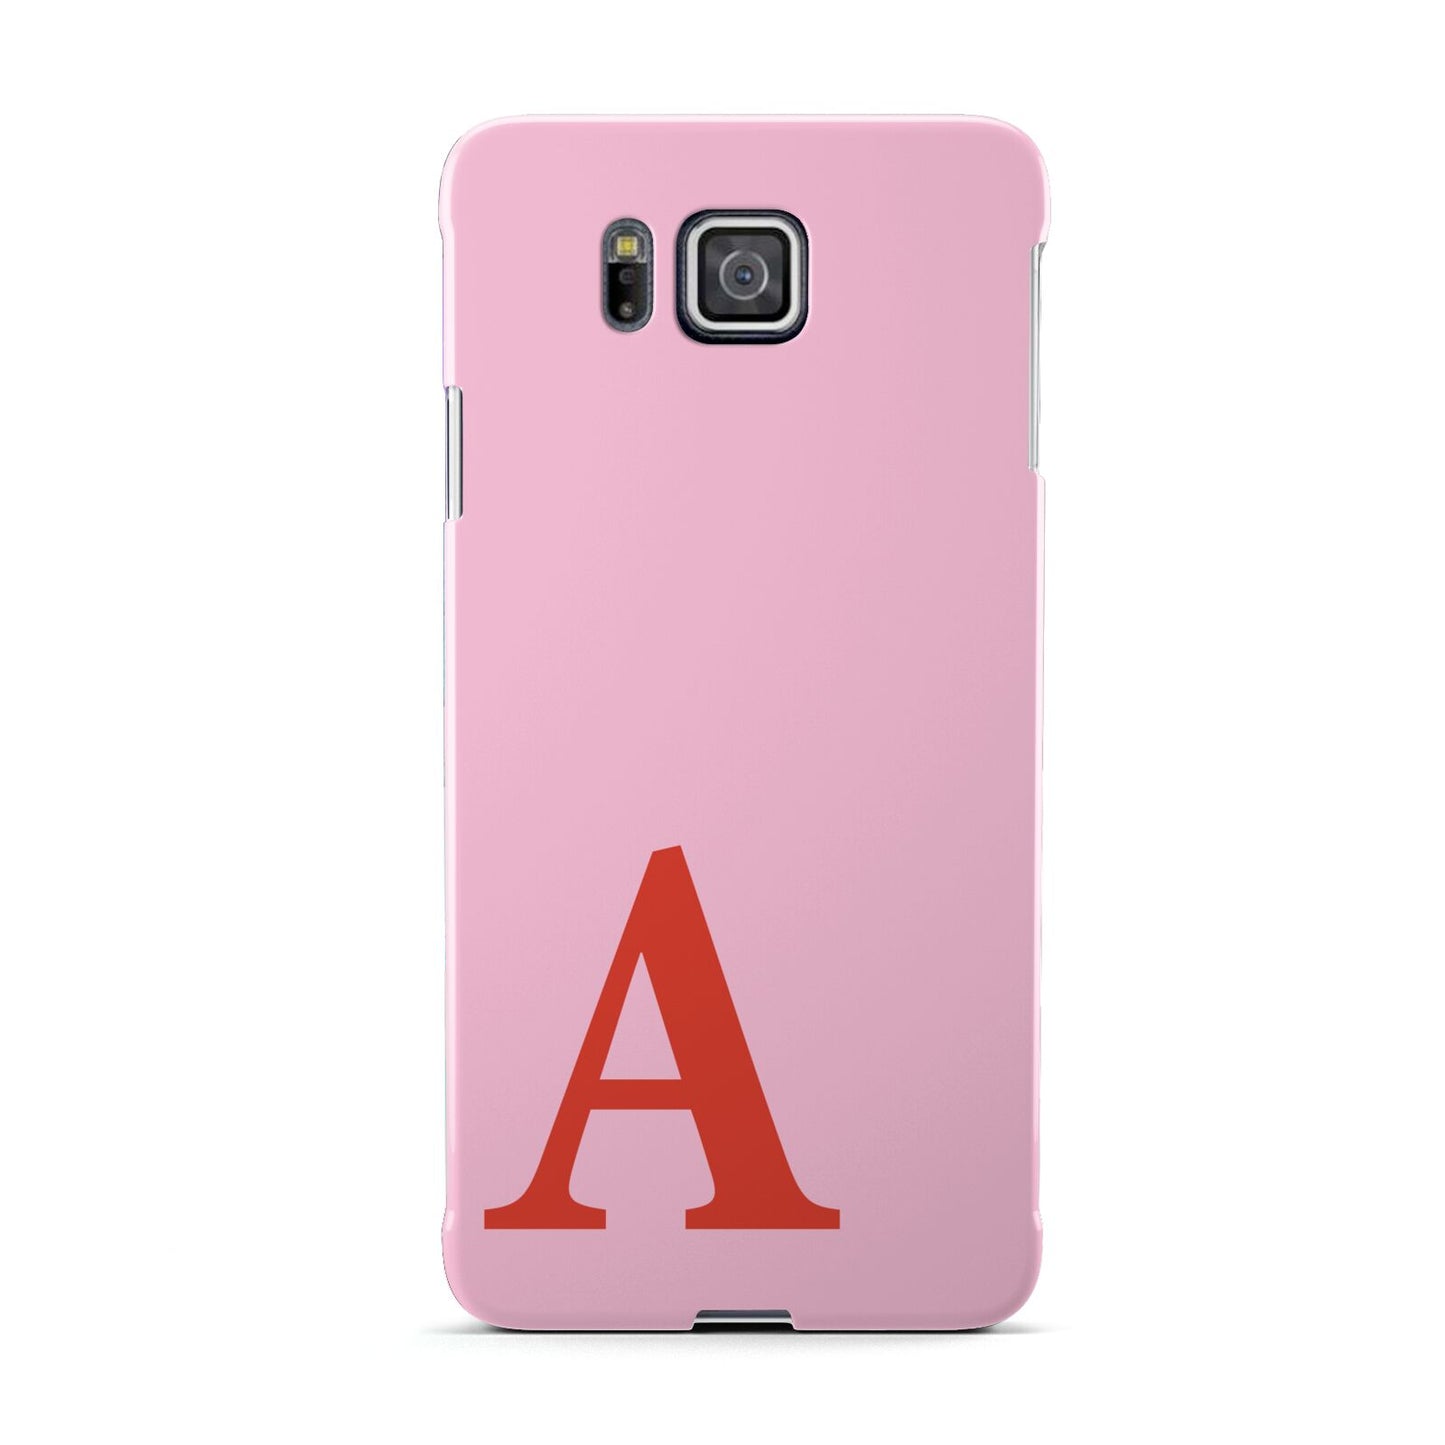 Personalised Pink and Red Samsung Galaxy Alpha Case